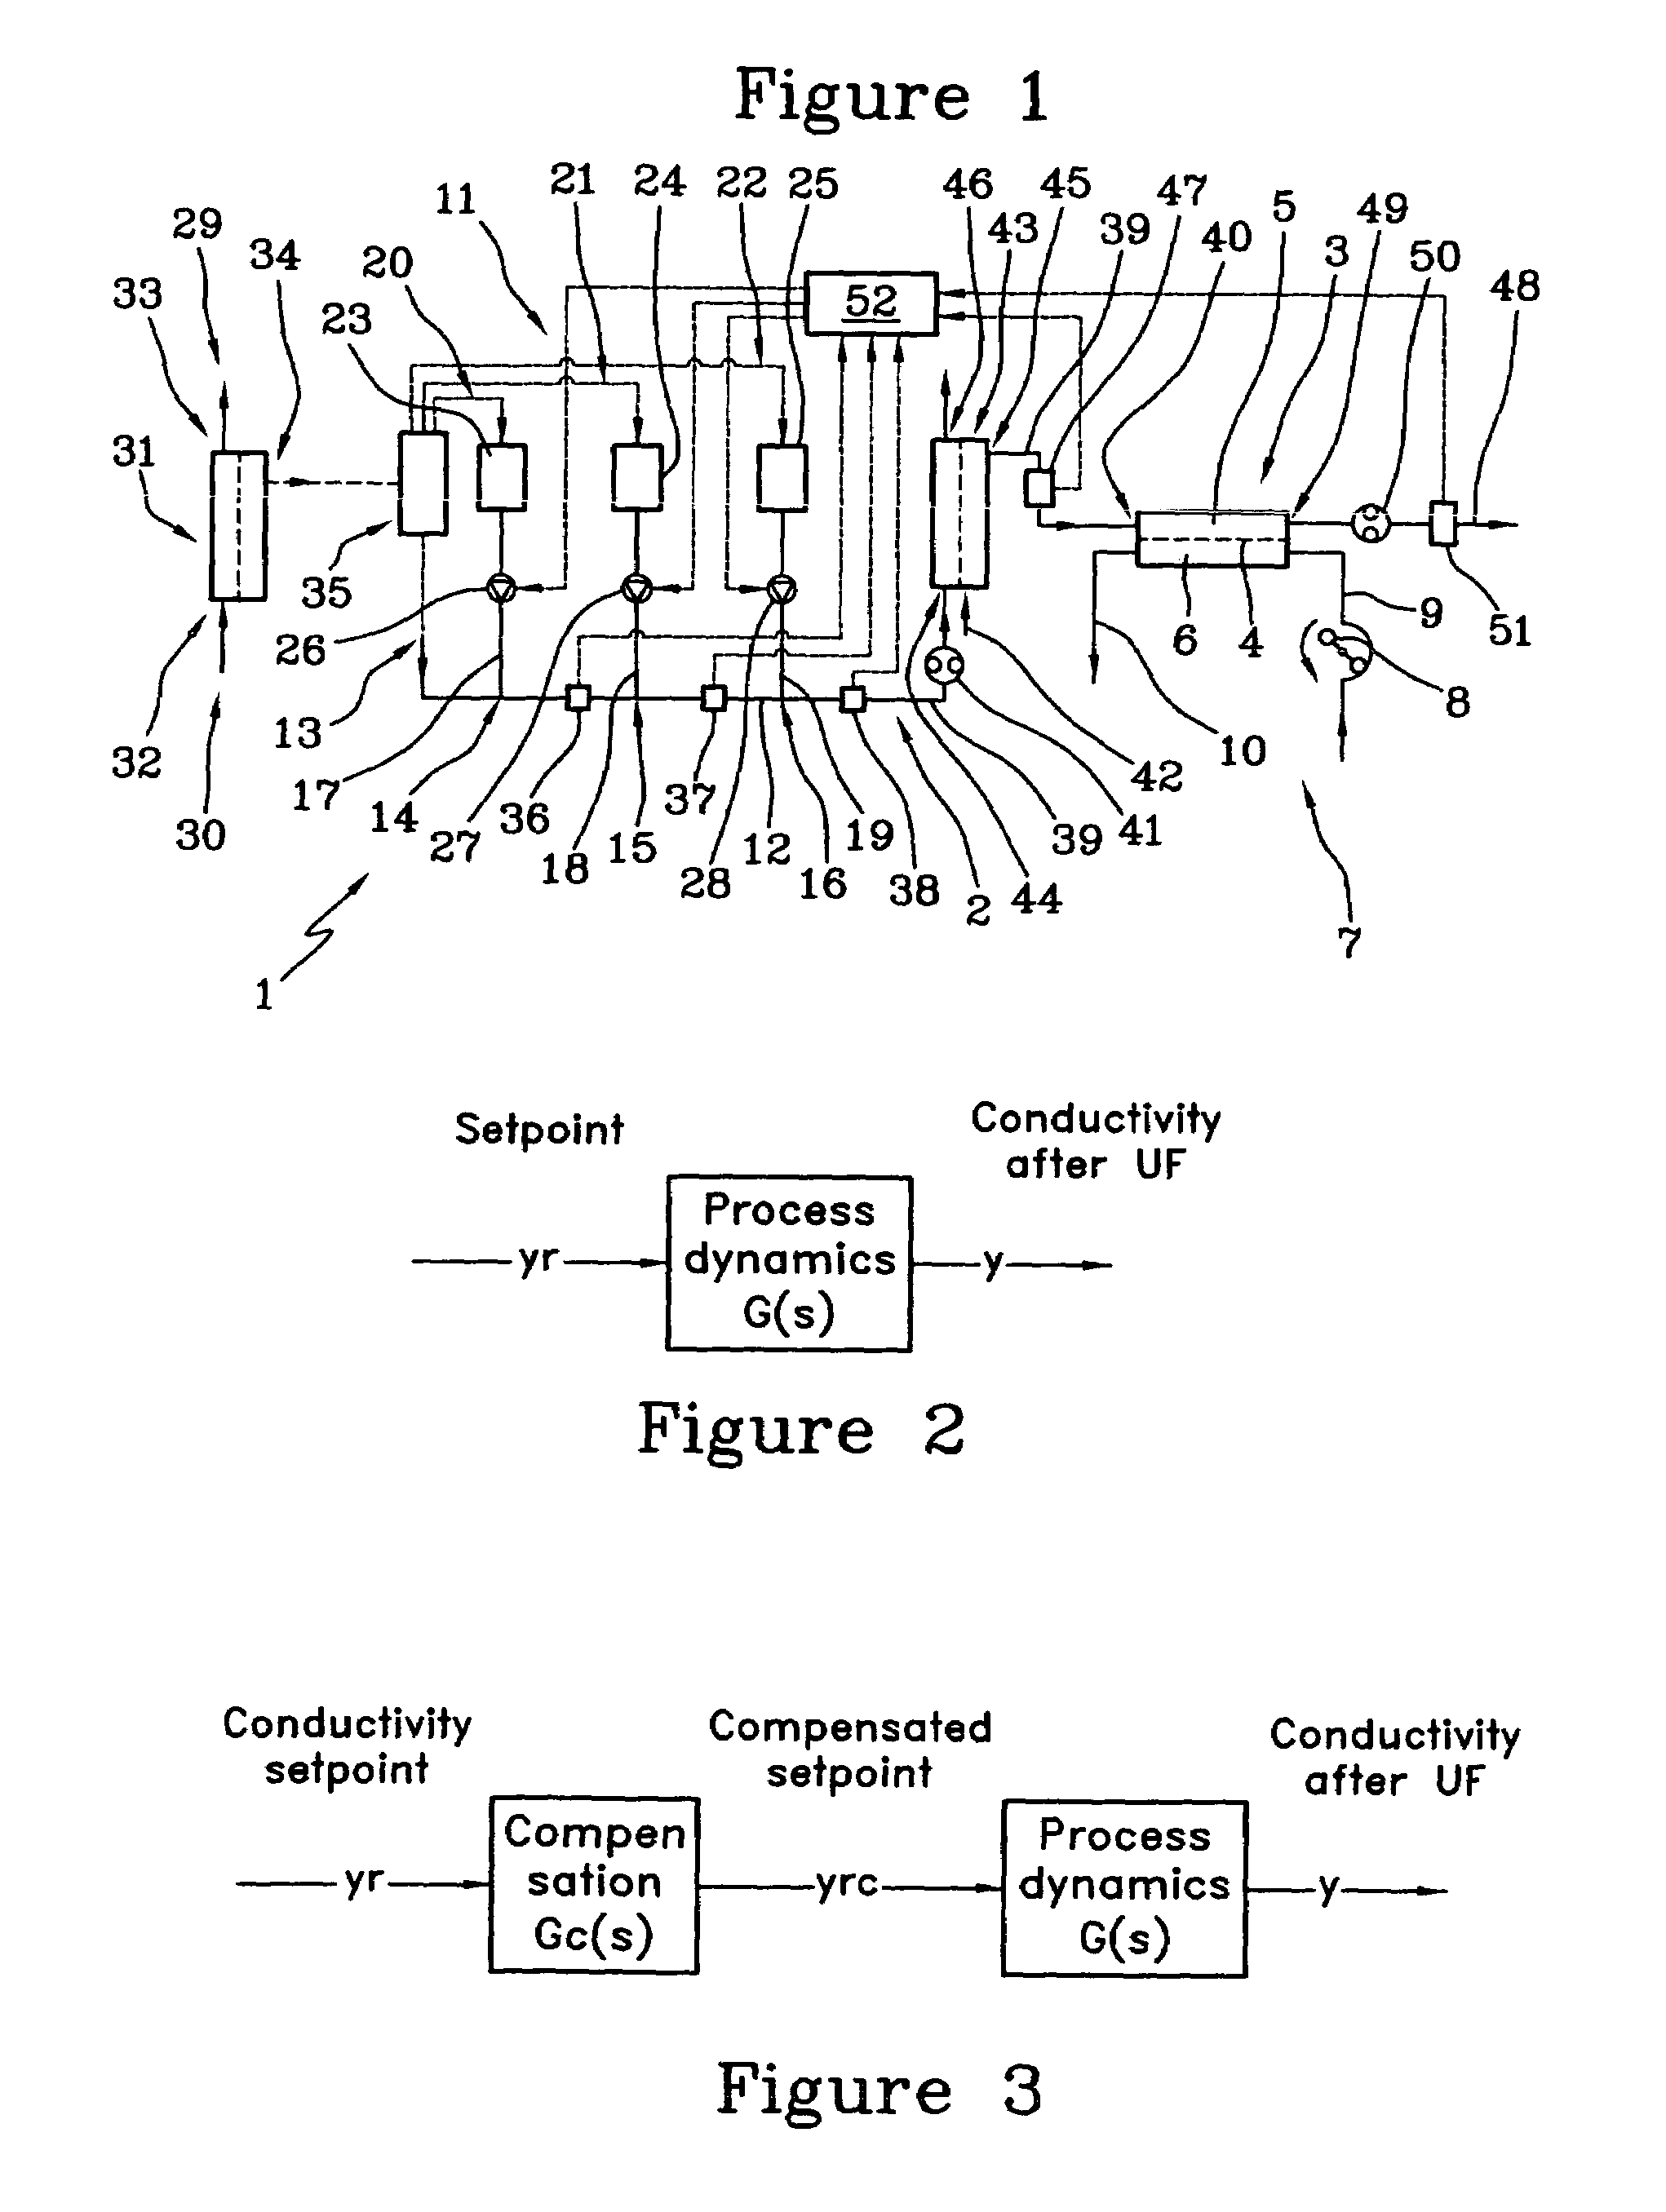 Method and apparatus for determining a patient or treatment or apparatus parameter during an extracorporeal blood treatment